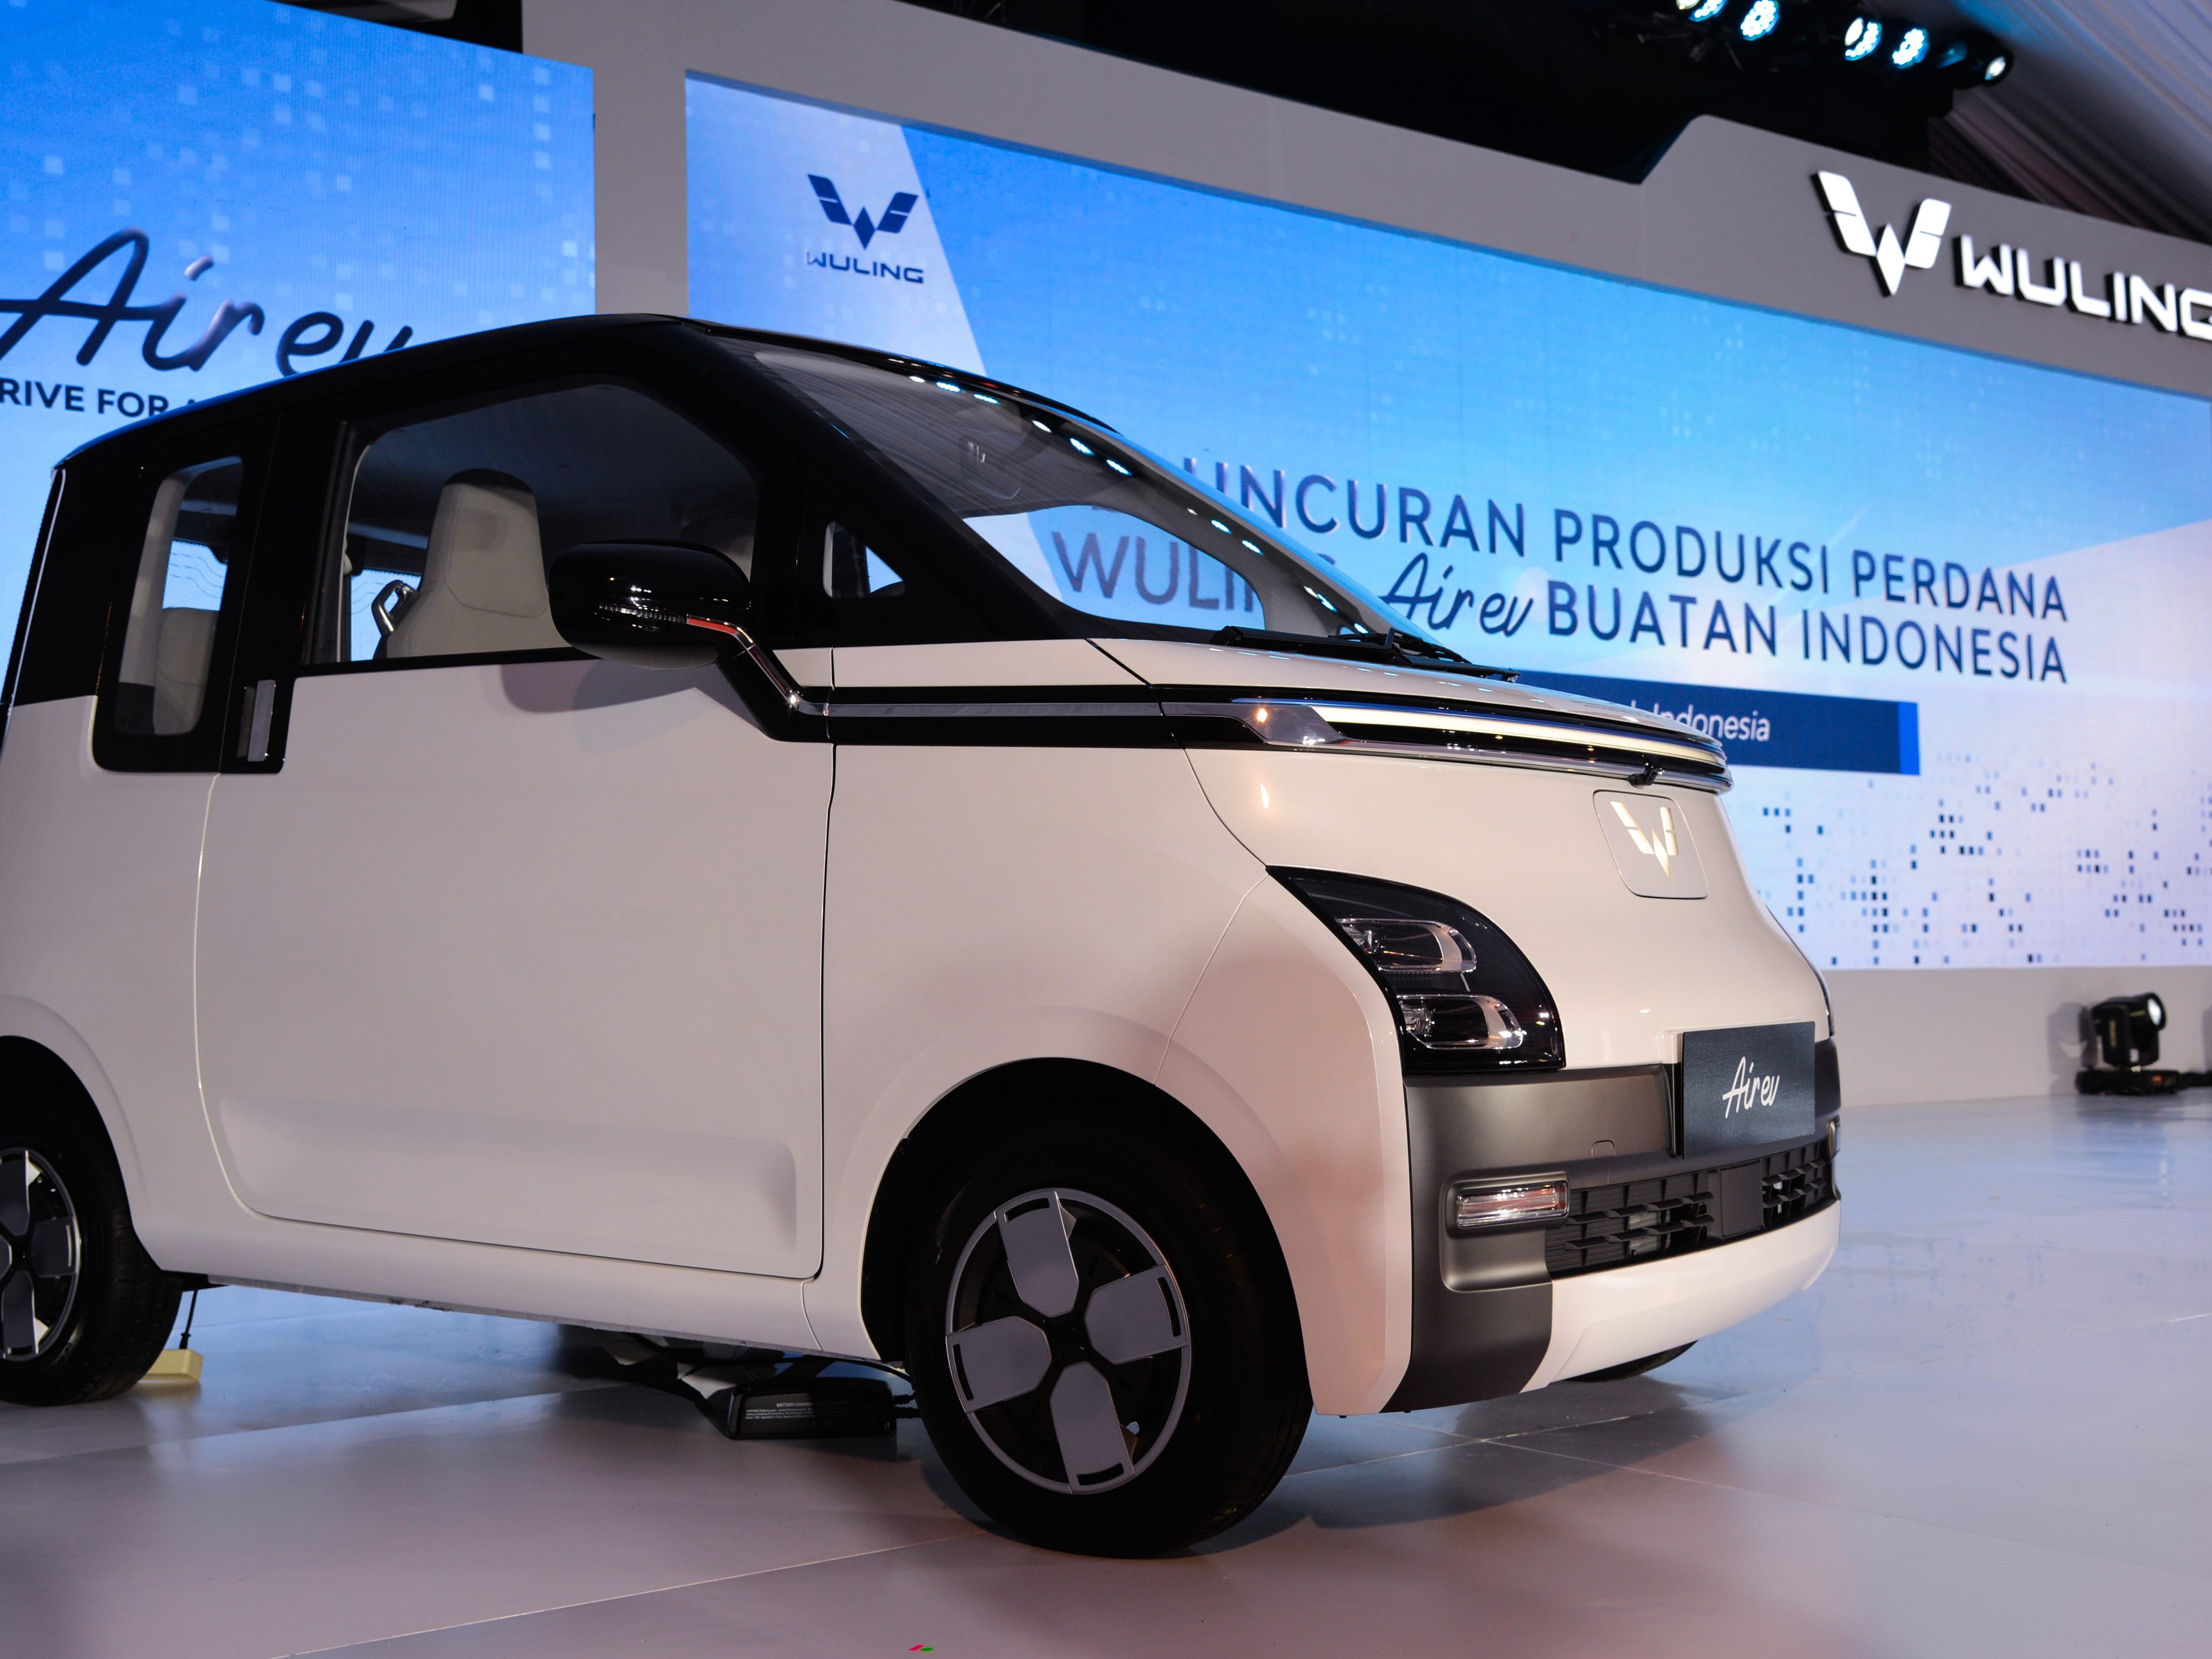 A Wuling Air EV car is pictured during the roll-out ceremony at Wuling's production factory in Bekasi, West Java province, Indonesia, Aug. 8, 2022. SAIC-GM-Wuling SGMW, a major Chinese automobile manufacturer, through its local unit SGMW Motor Indonesia Wuling, on Monday launched here its production of the electric vehicle in Indonesia, named Wuling Air EV.